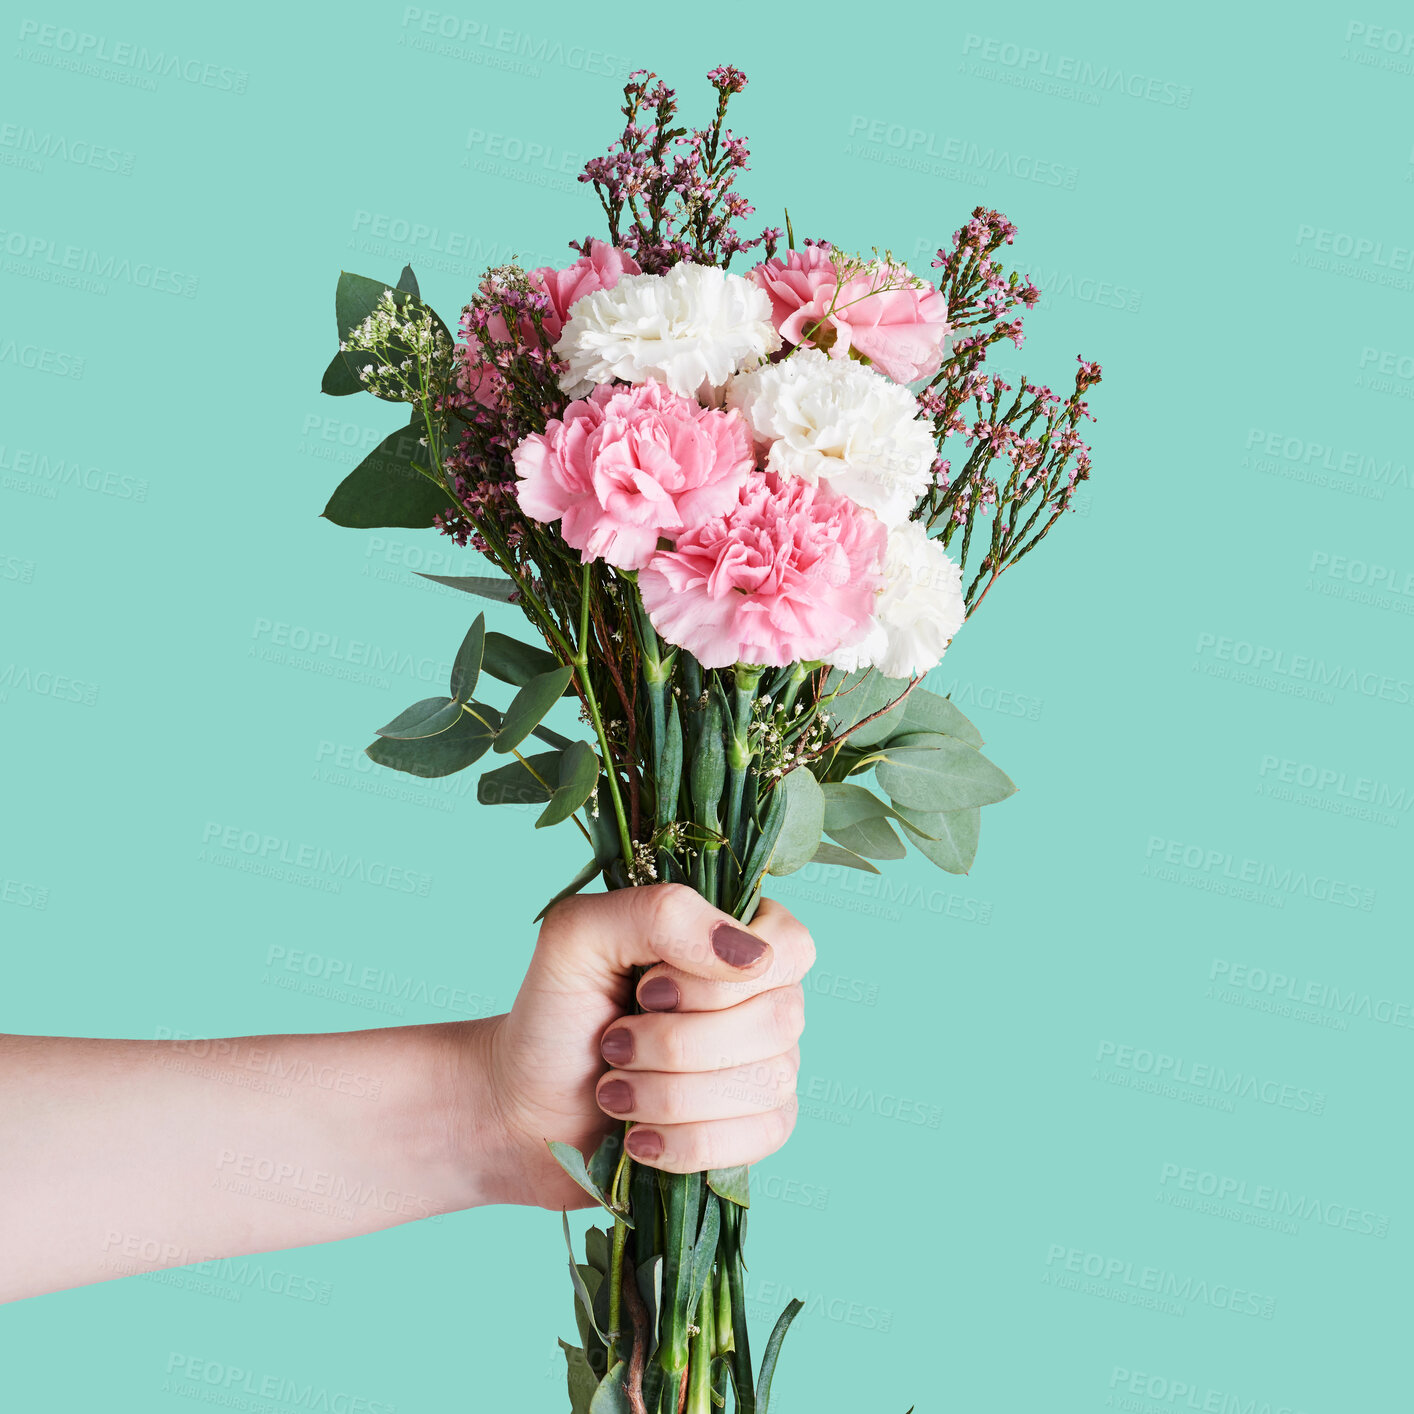 Buy stock photo Flowers, bouquet and hands of woman on blue background for nature, spring and natural beauty. Romance mockup, present and girl with manicure holding botanical, floral or blossom gift in studio space